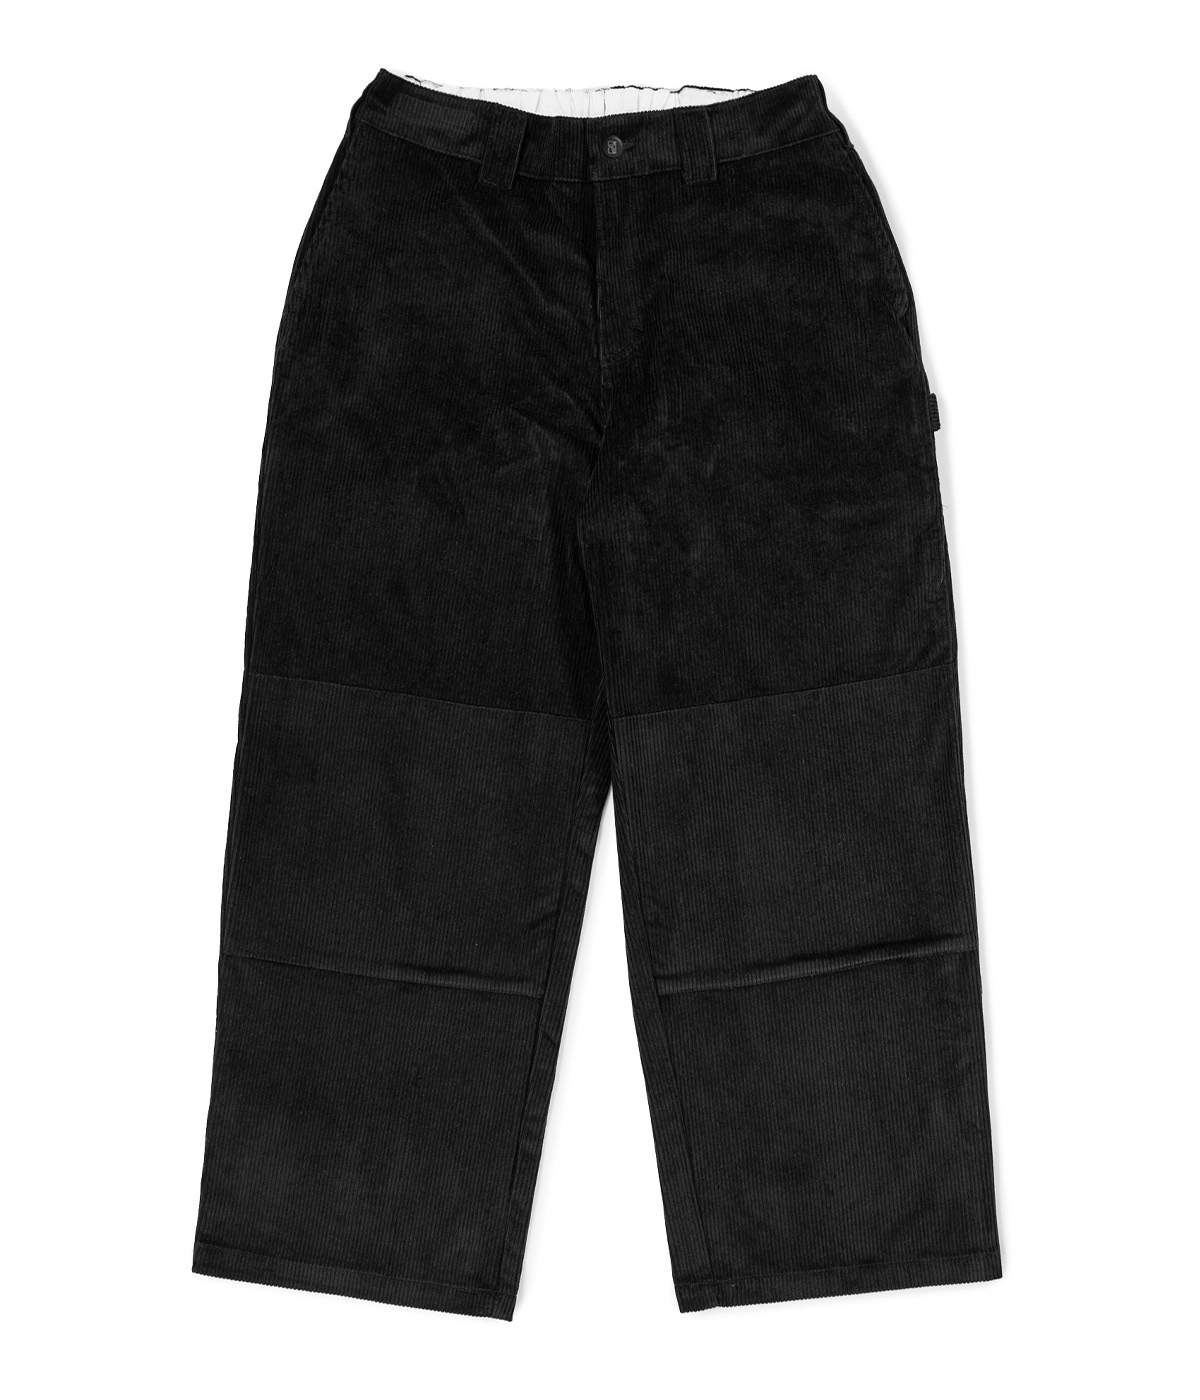 Poetic Collective Sculptor Pant, black